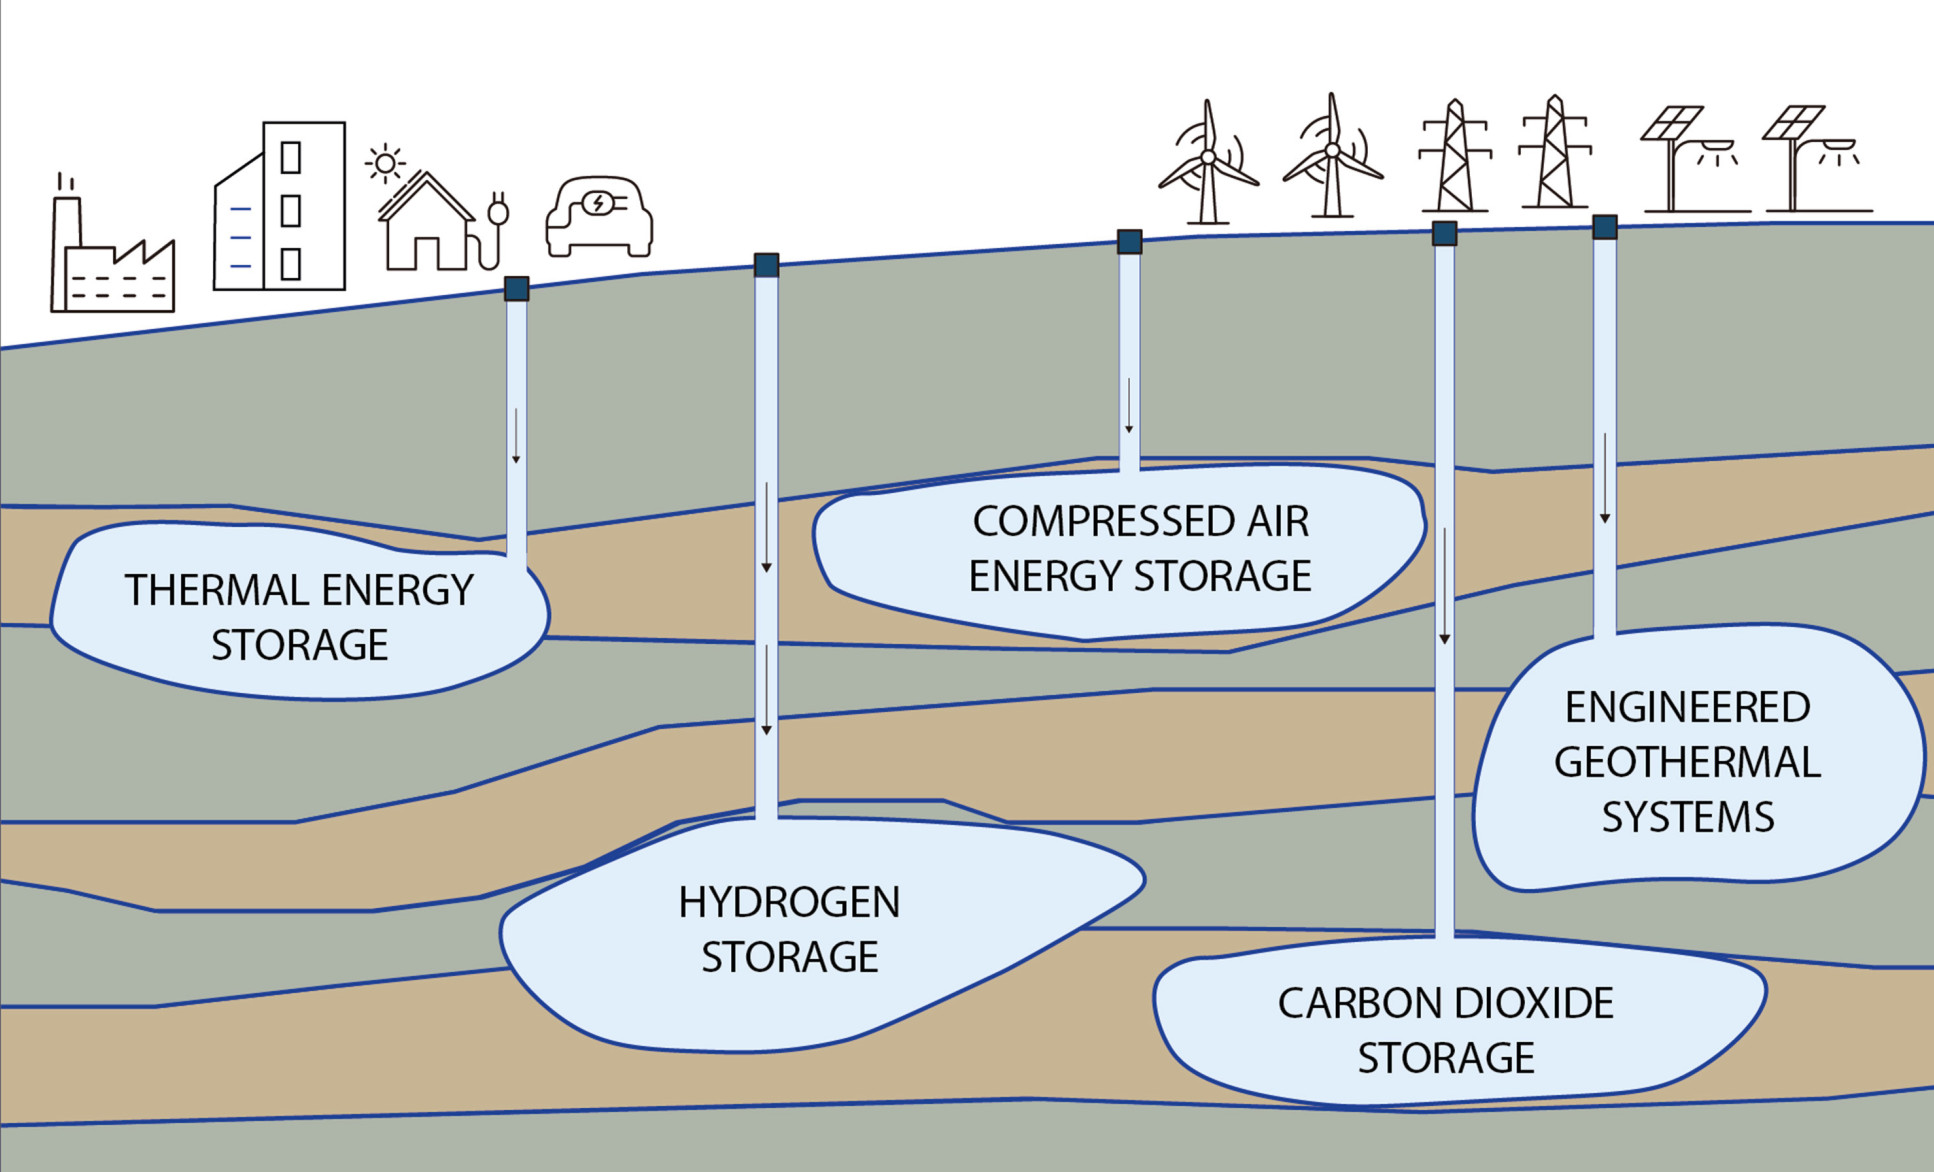 Diagram showing how Green energy for homes and industry will be stored underground